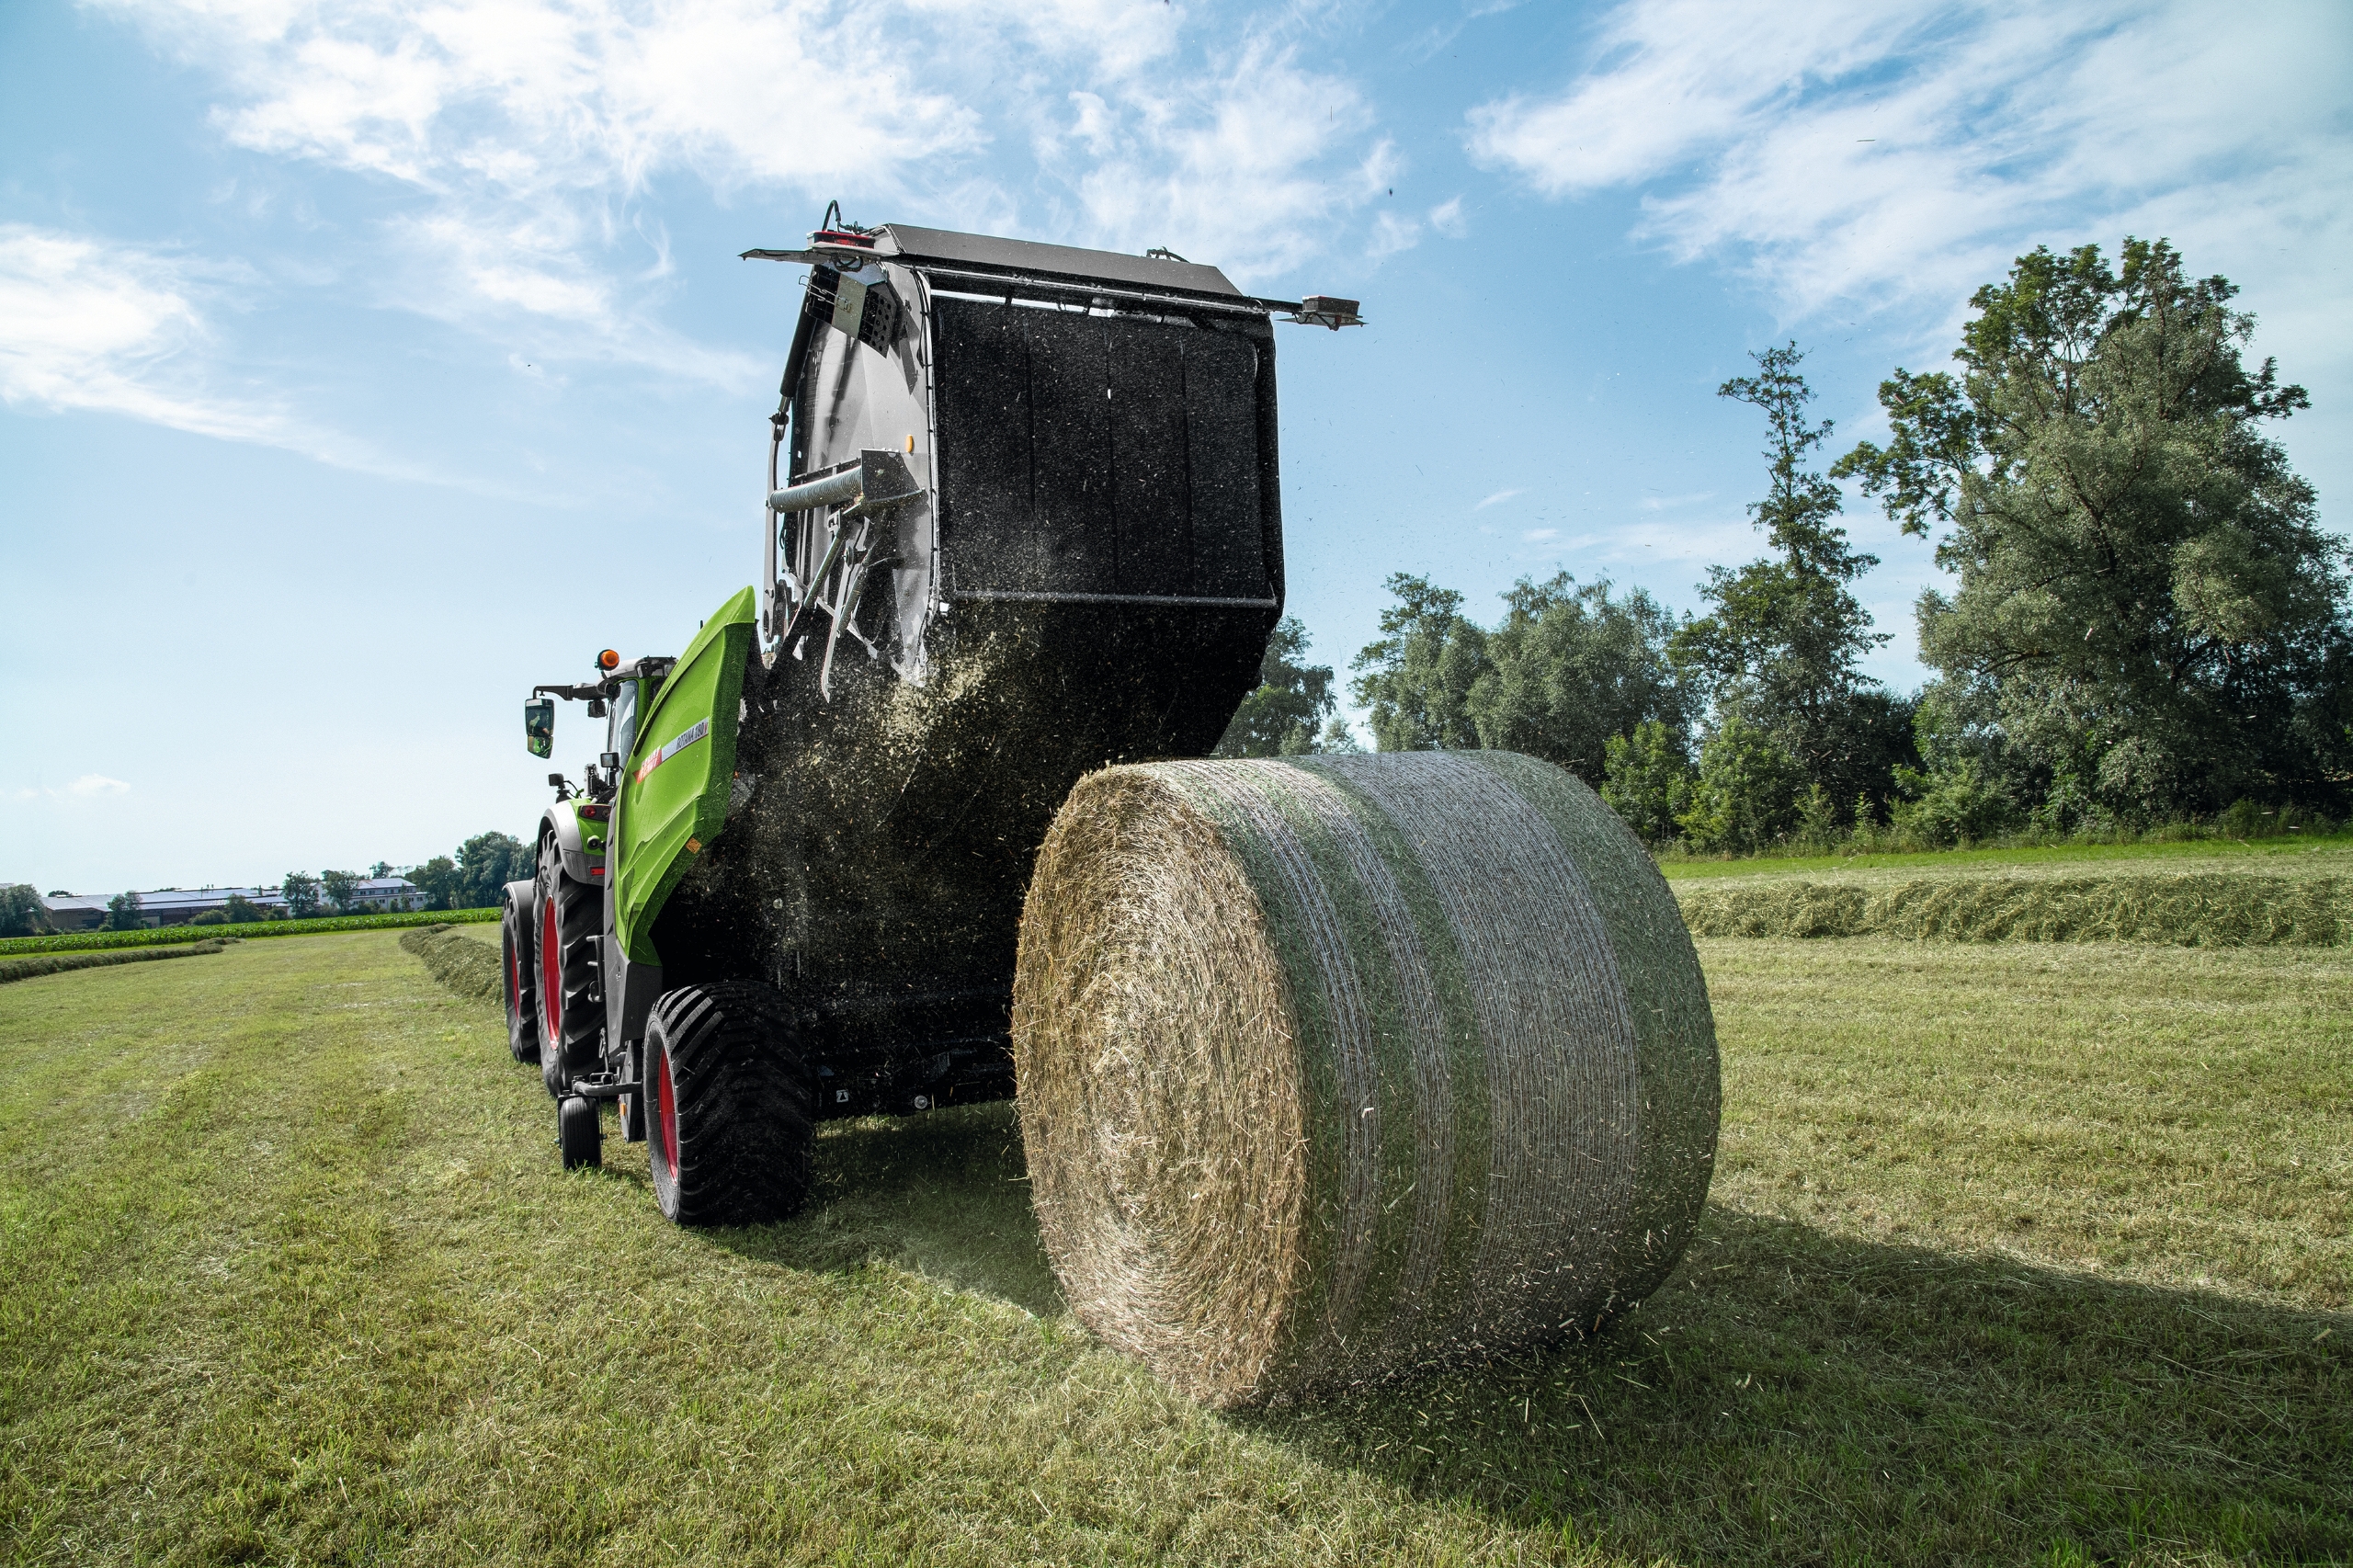 Automated processes for the Fendt Rotana round balers